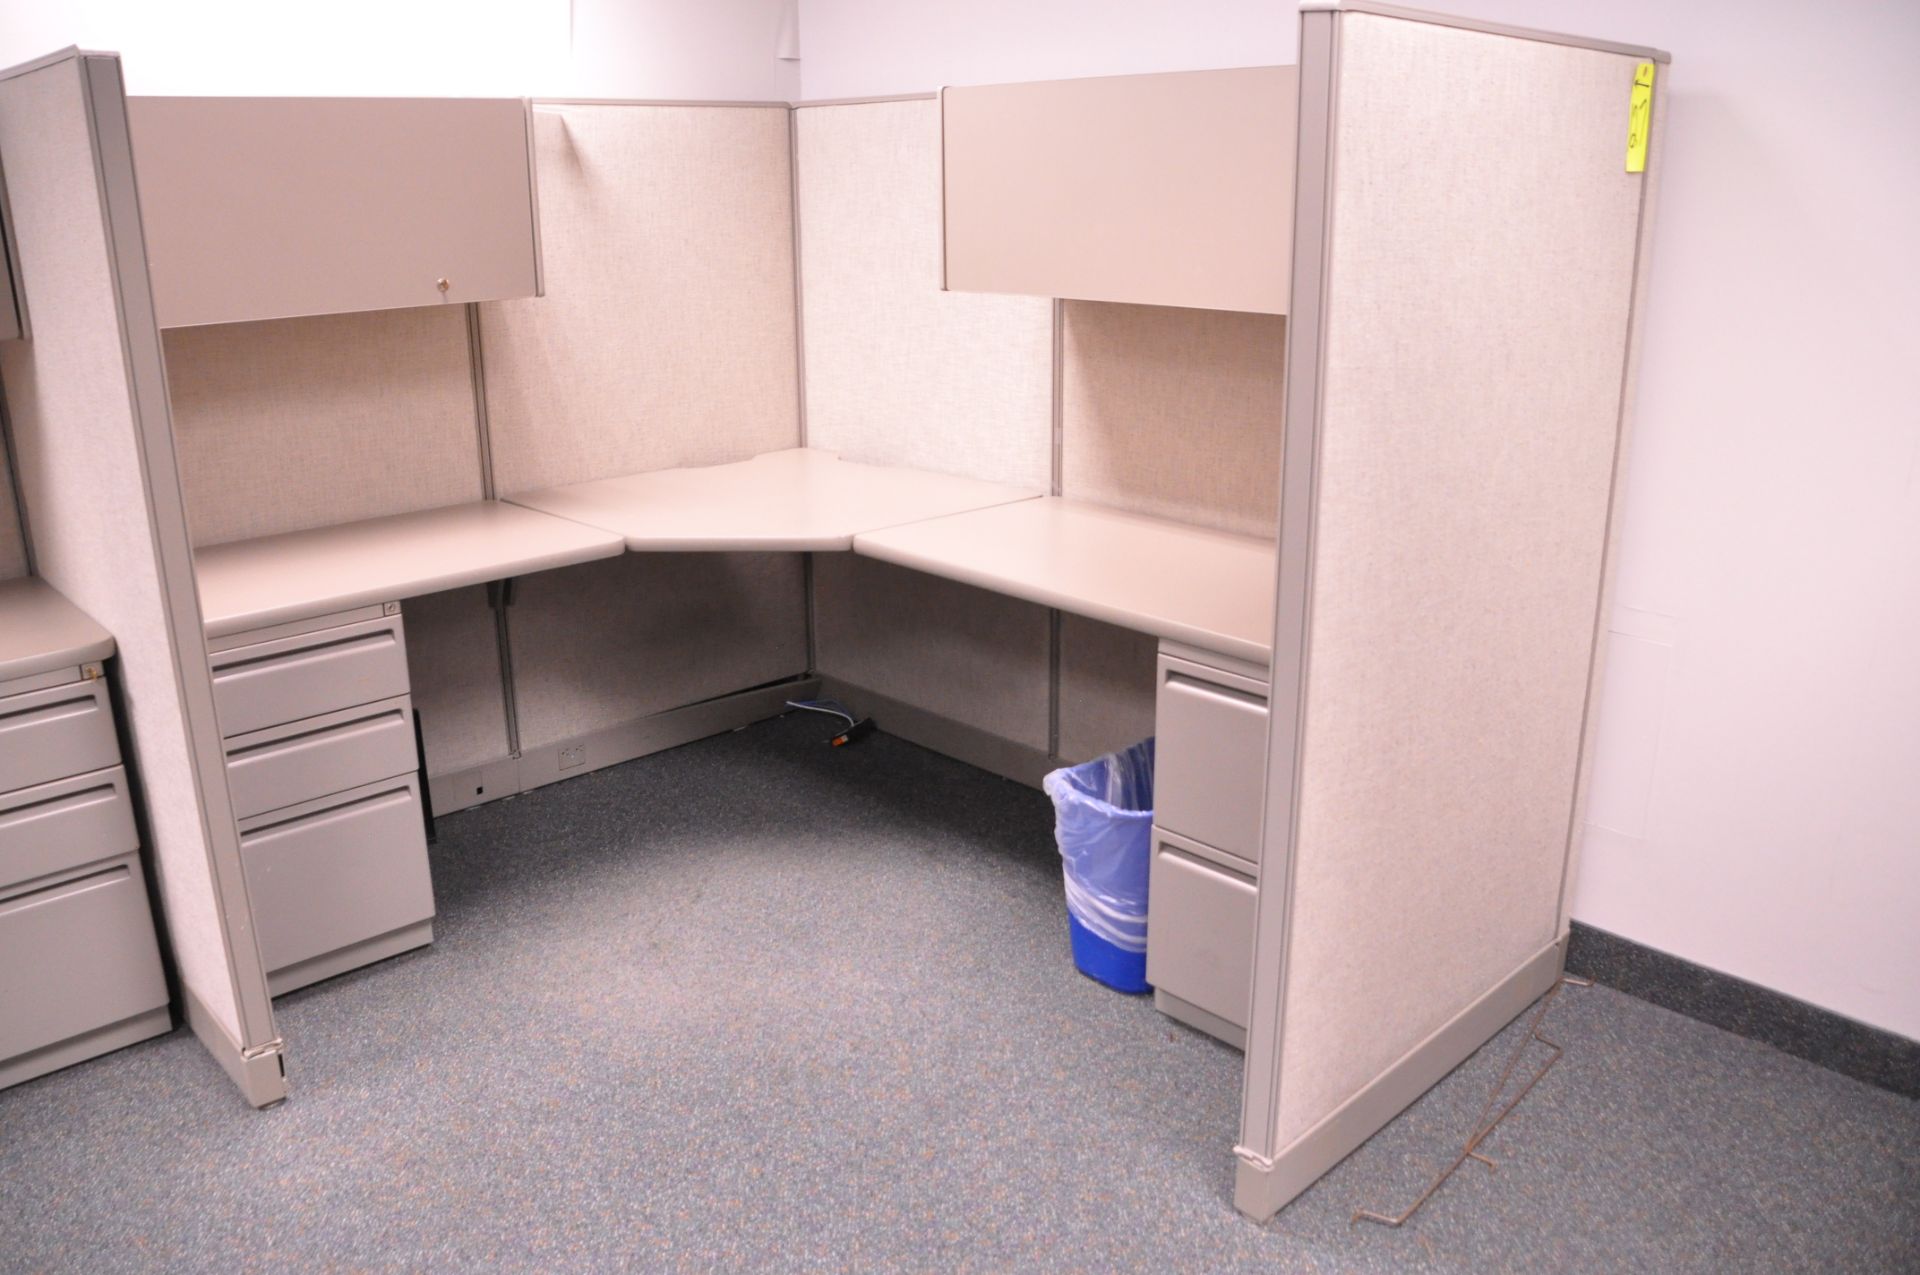 Lot-(1) 3-Station Cubicle Partition Work System with Overhead Cabinets, (No Chairs), (Located 2nd - Image 2 of 4